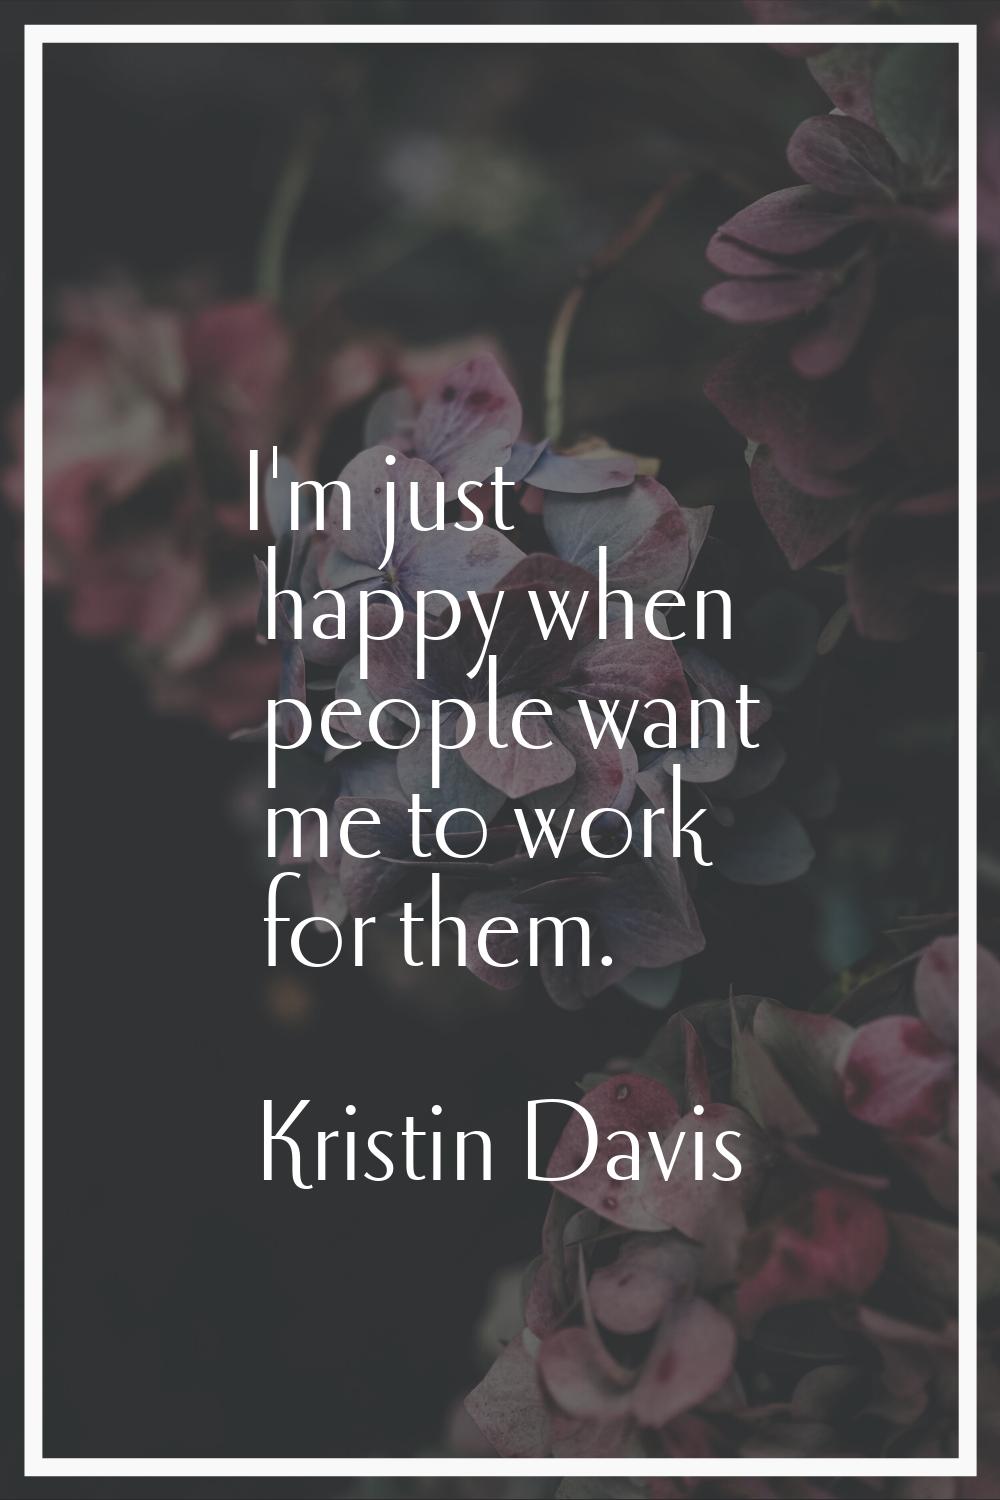 I'm just happy when people want me to work for them.